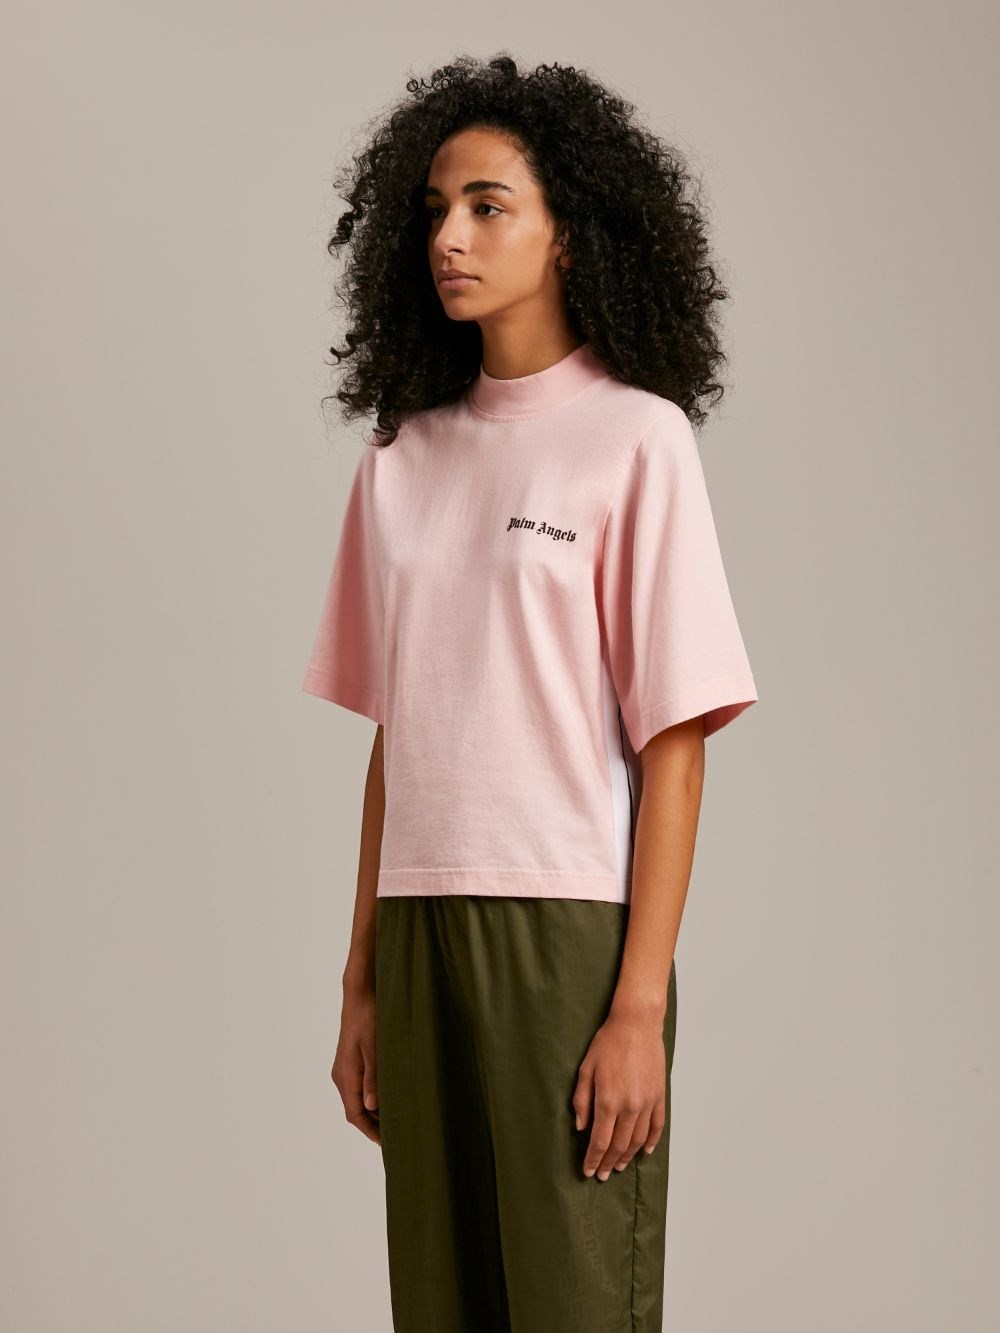 palm angels LOGO T-SHIRT available on montiboutique.com - 40650